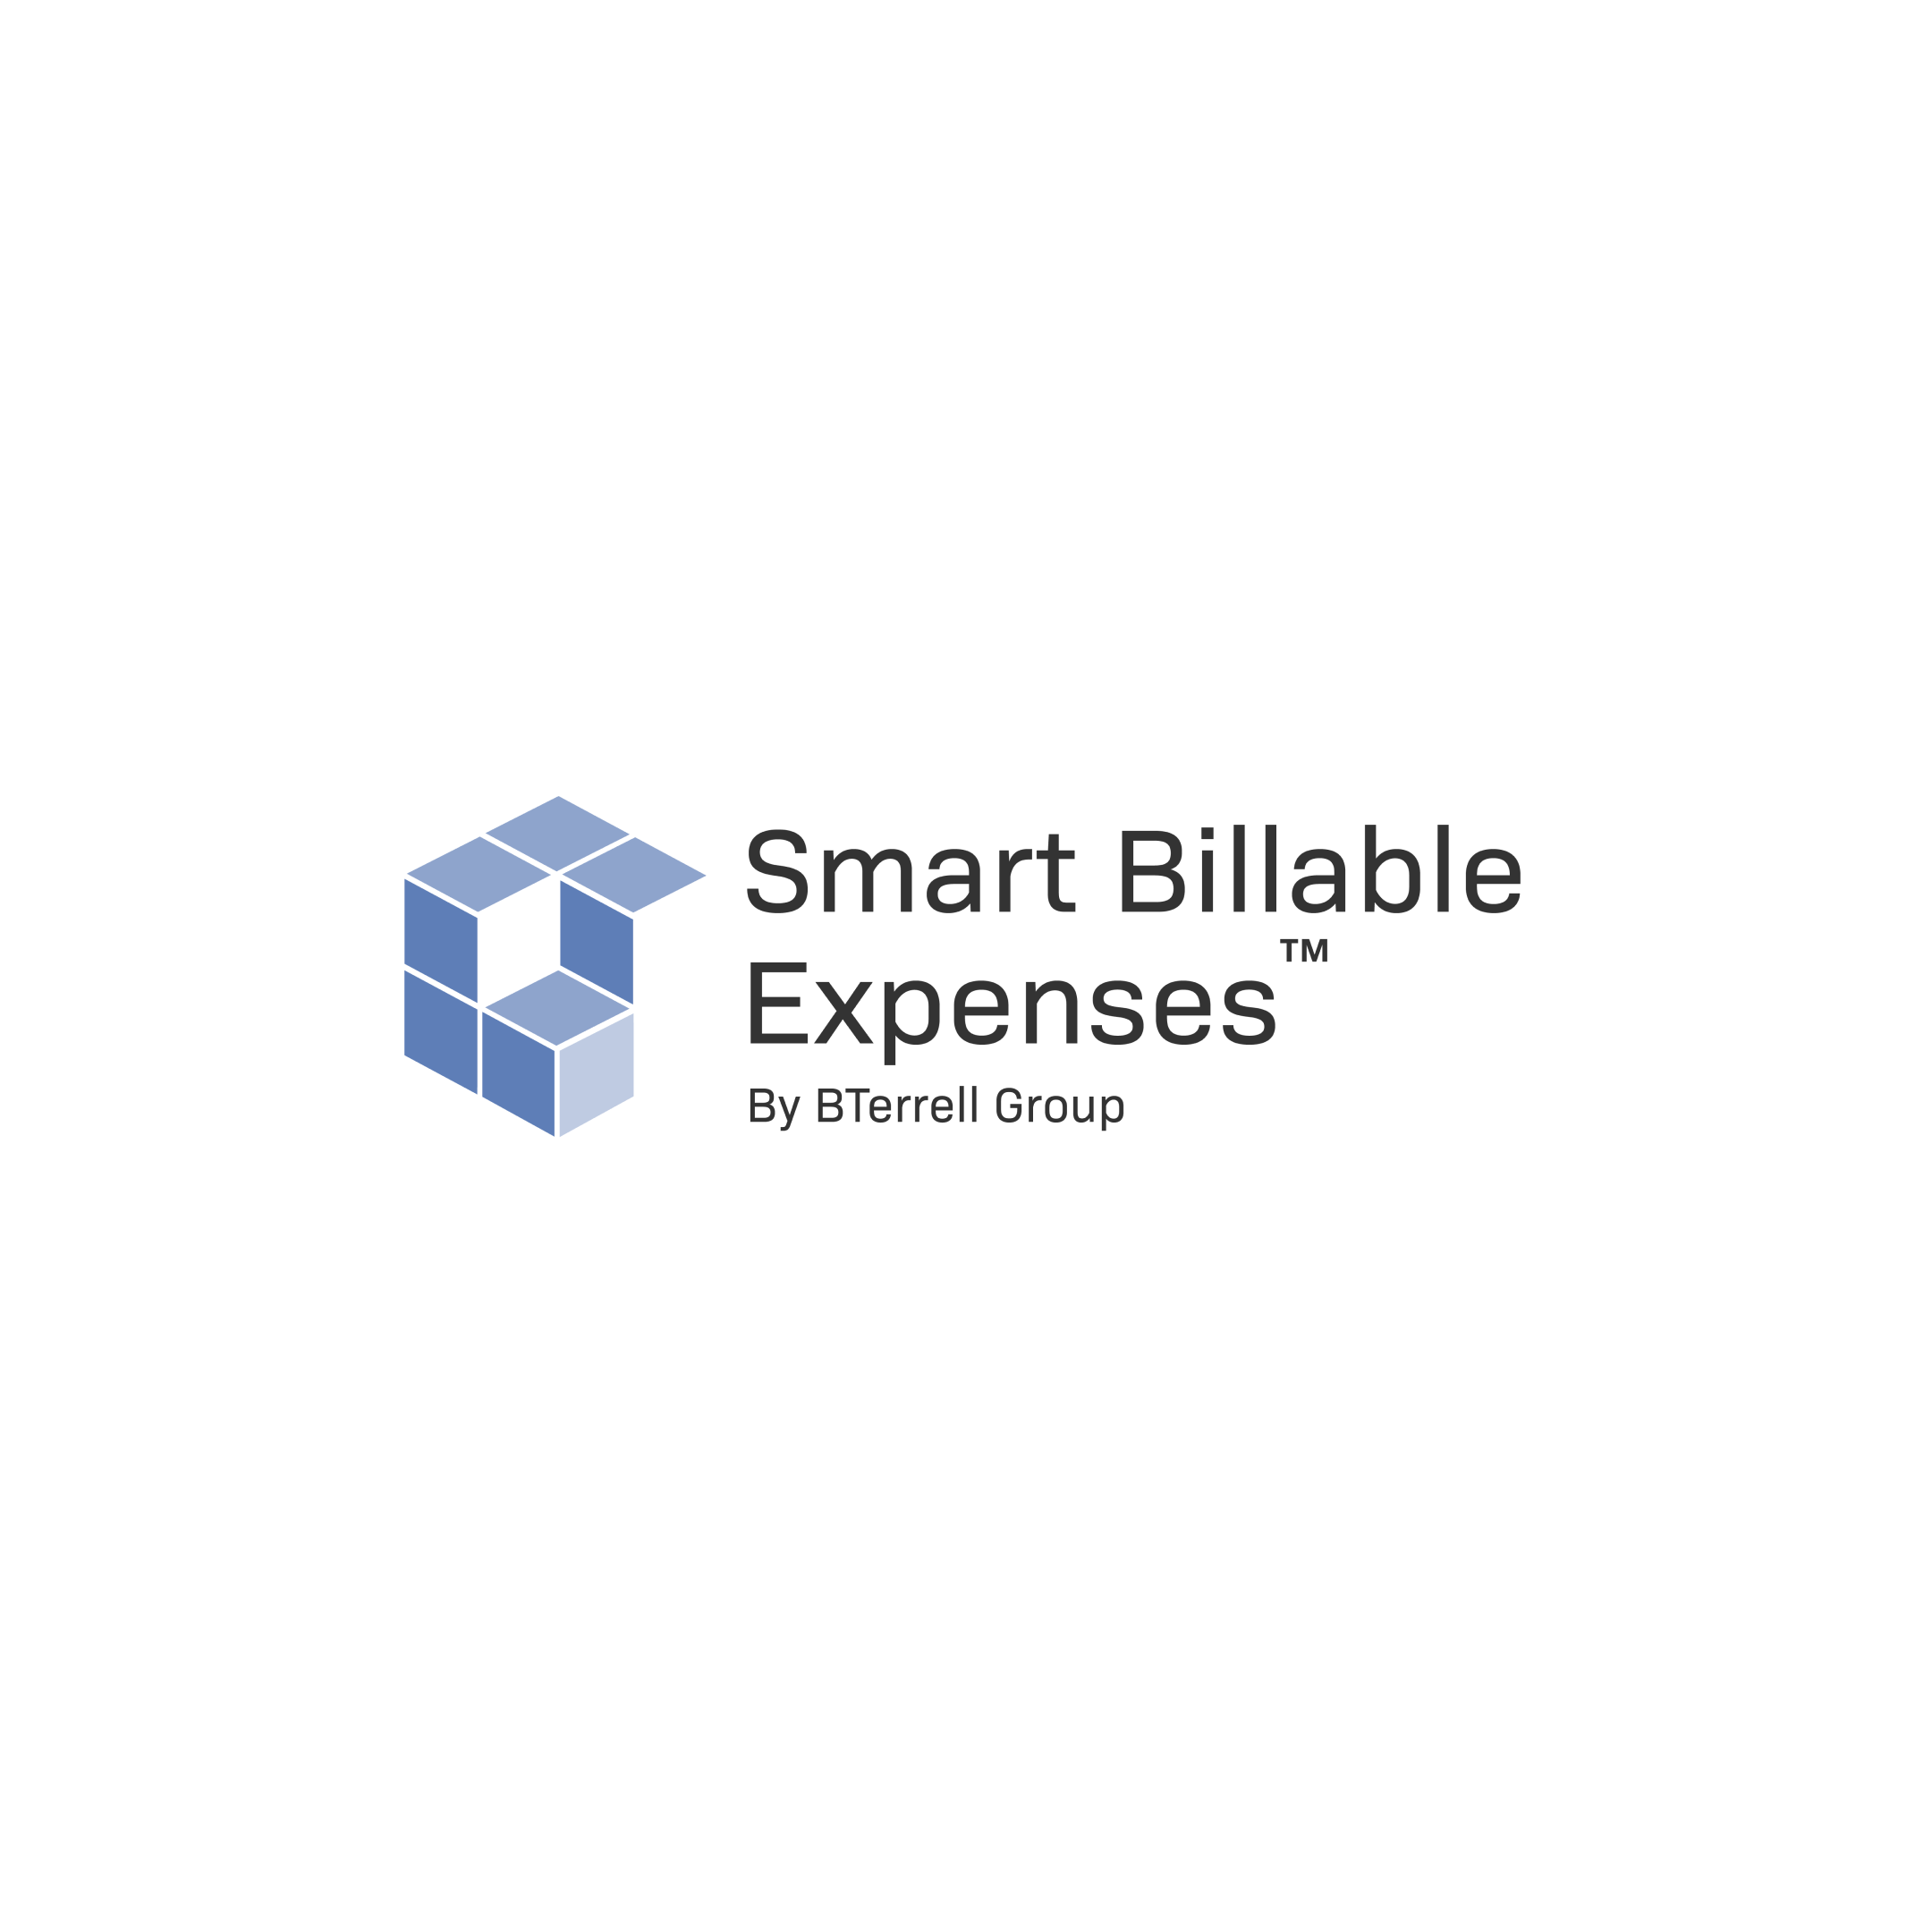 Smart Billable Expenses